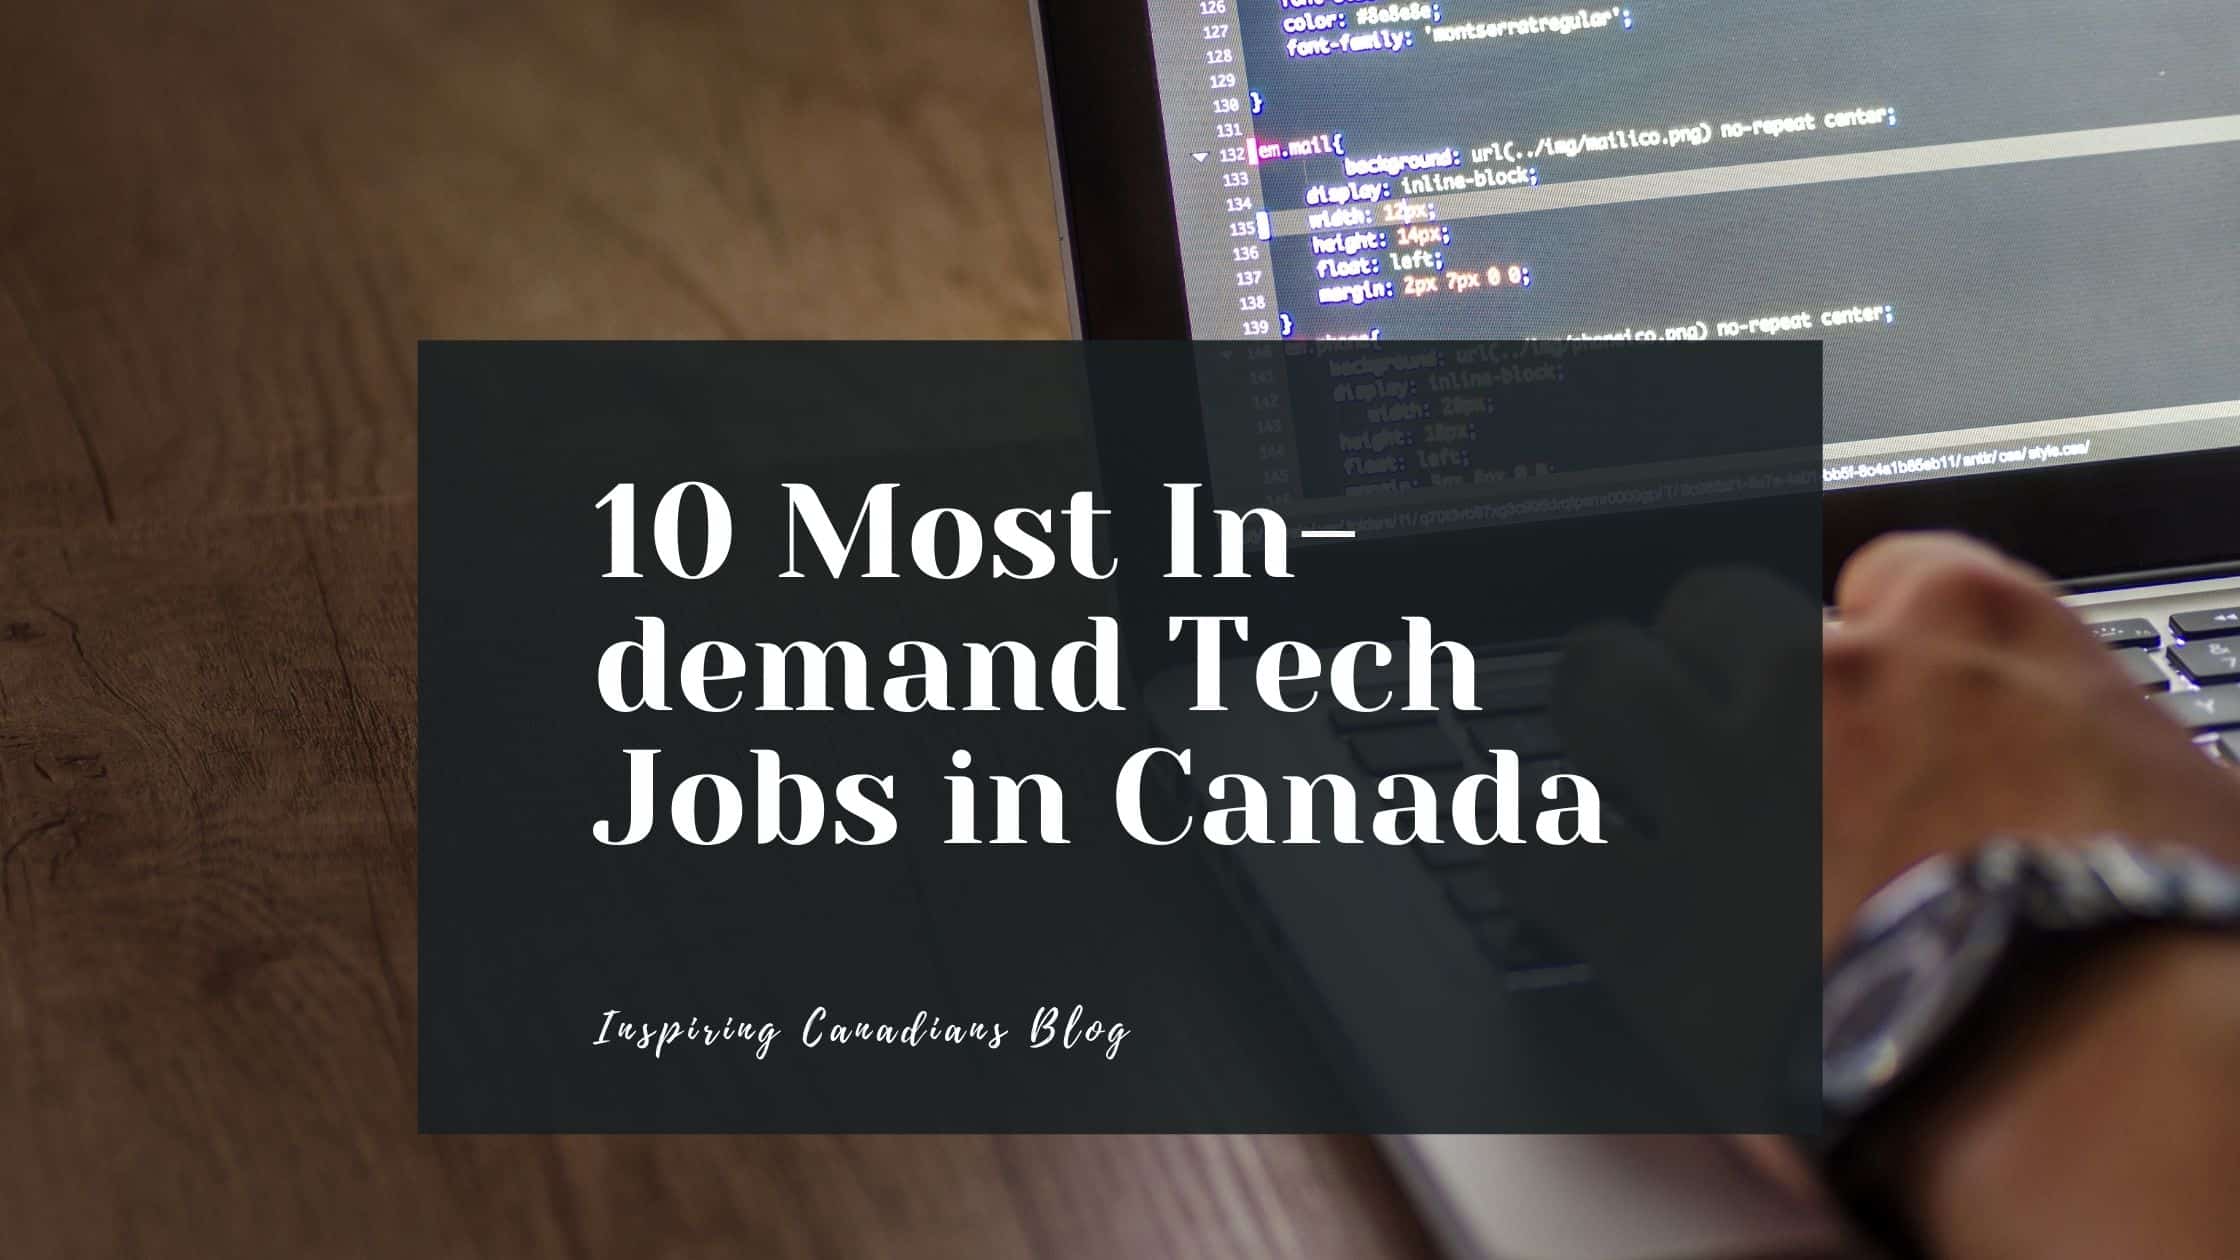 10 Most In-demand Tech Jobs in Canada